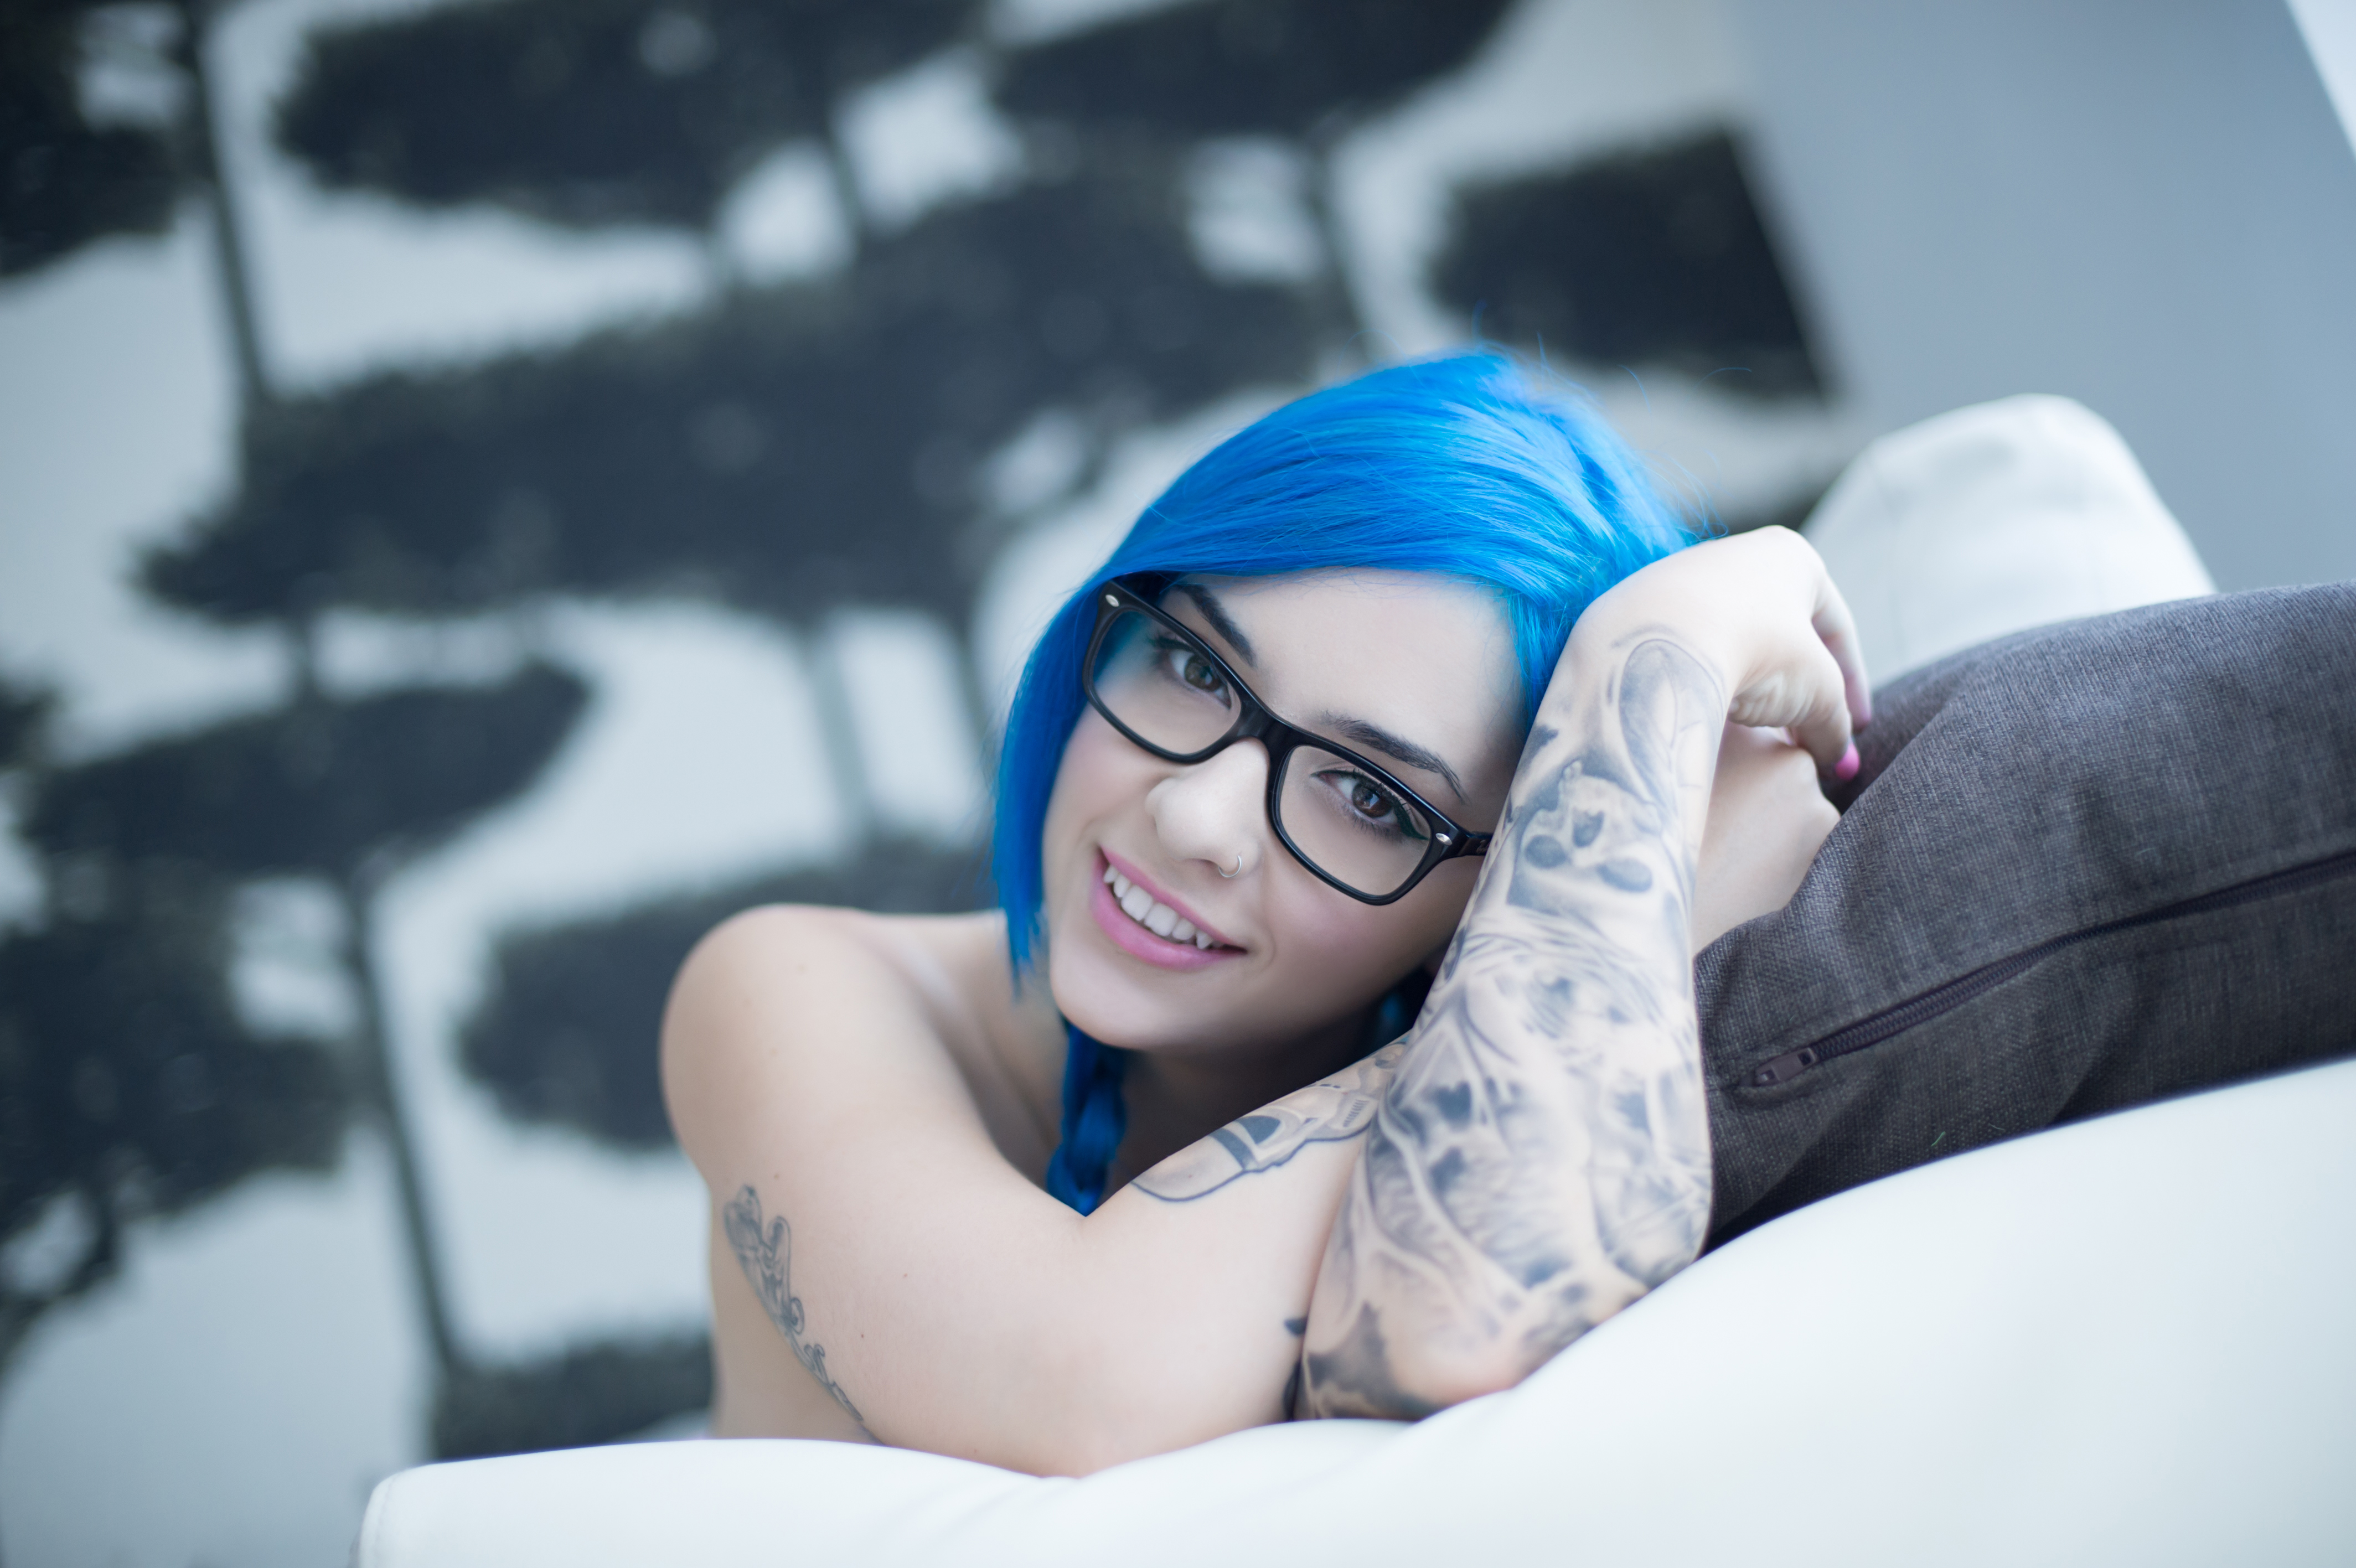 Beautiful Suicide Girl Drielly Swimming pool 35 High resolution lossless iP...